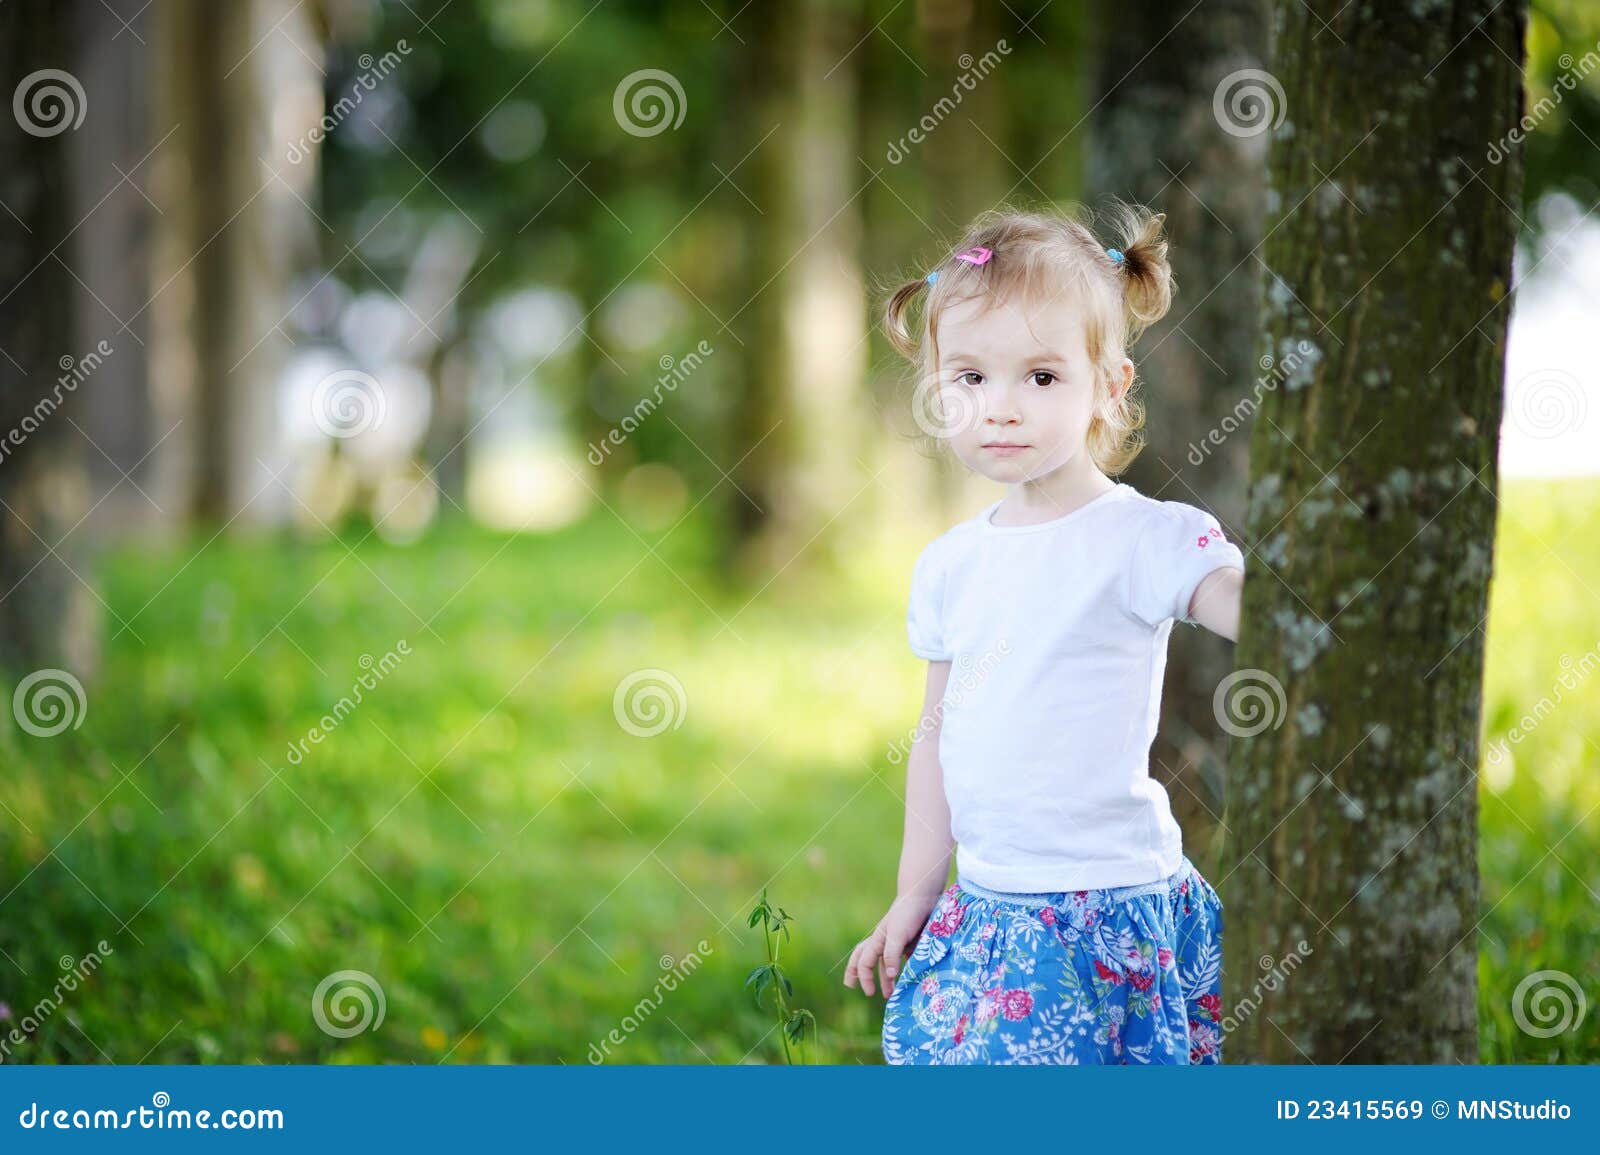 Adorable Little Girl Portrait Outdoors Stock Image - Image of hair ...